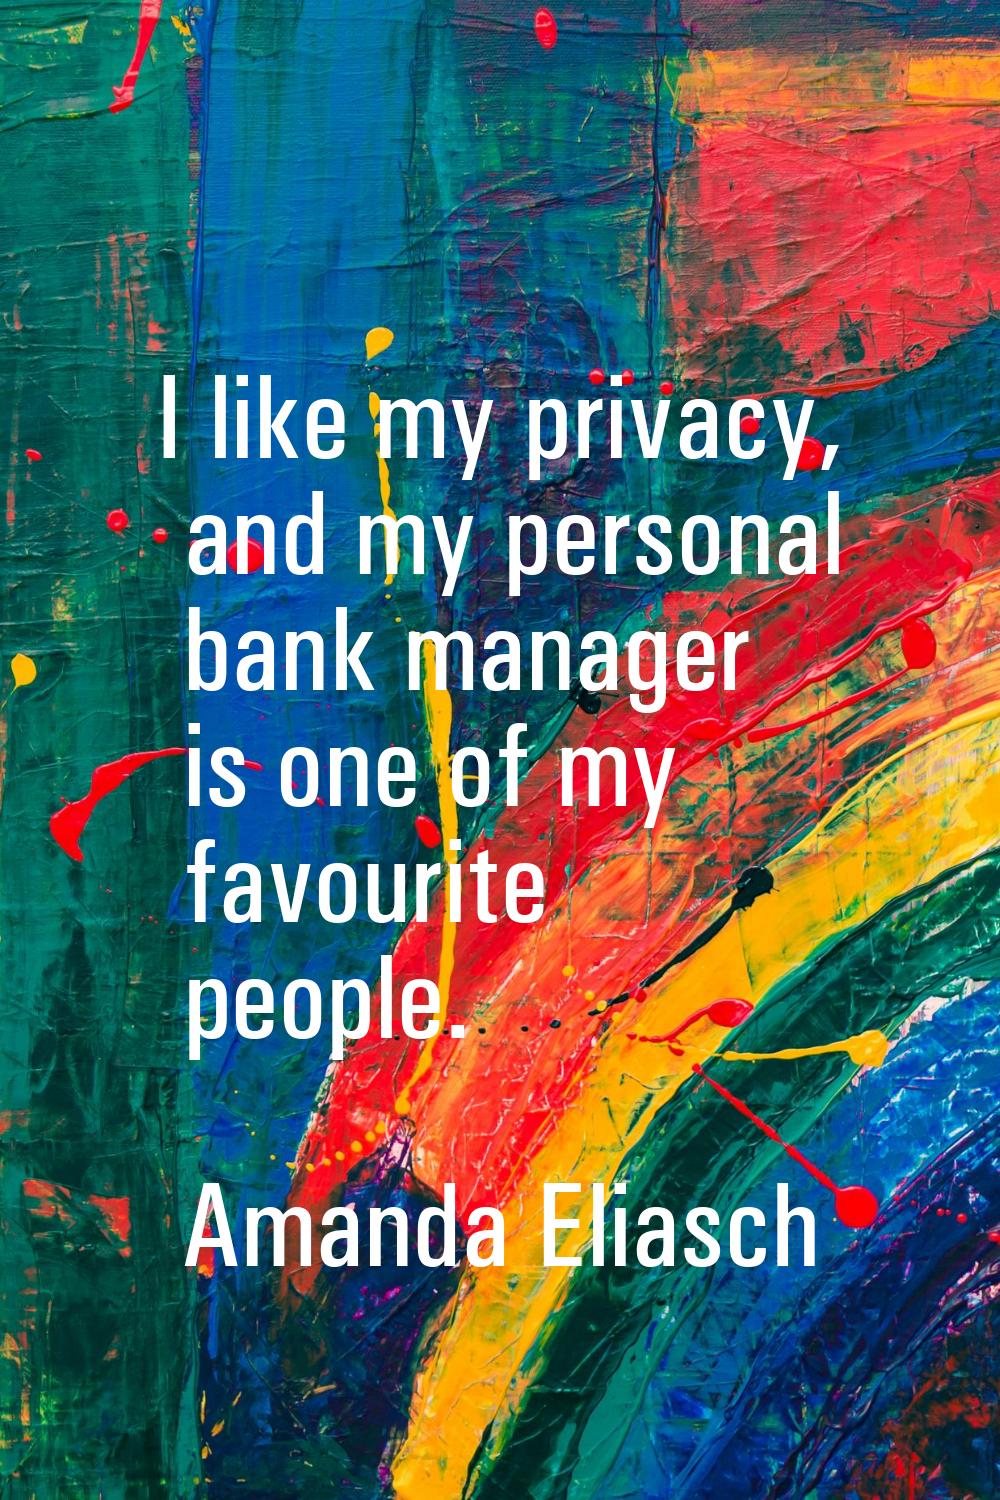 I like my privacy, and my personal bank manager is one of my favourite people.